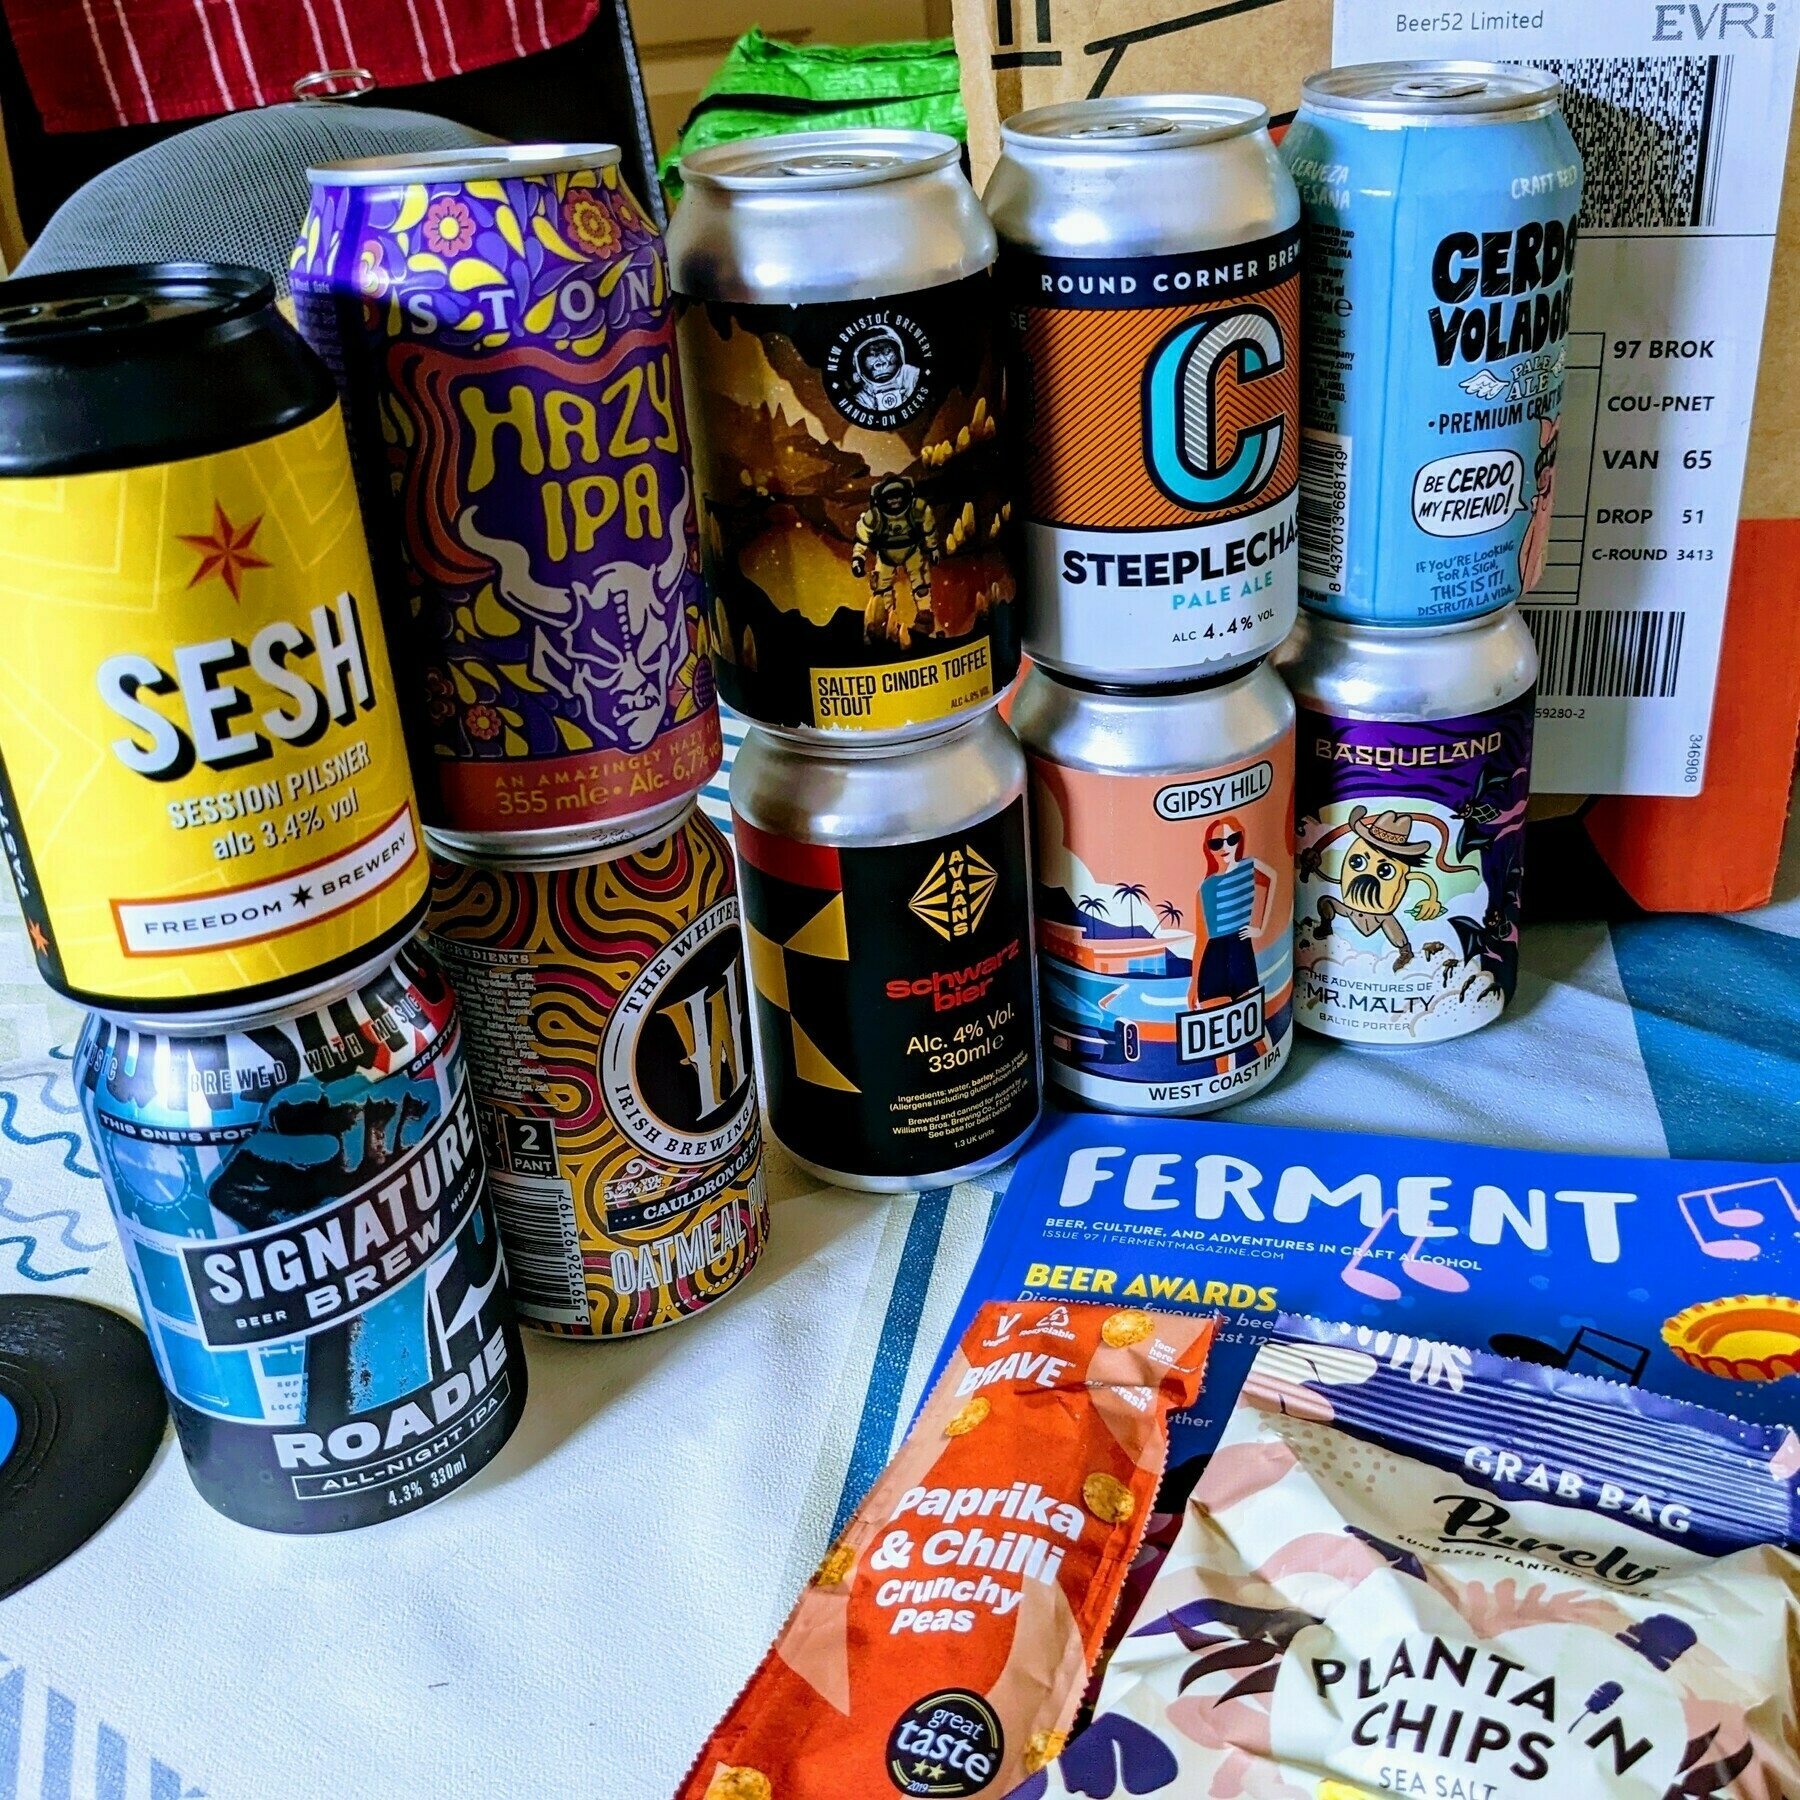 Ten colourful cans of light and dark craft beers stacked in twos alongside the Evri delivery box they arrived in, a copy of 'Ferment' magazine and a couple of 'free' snacks thrown in.